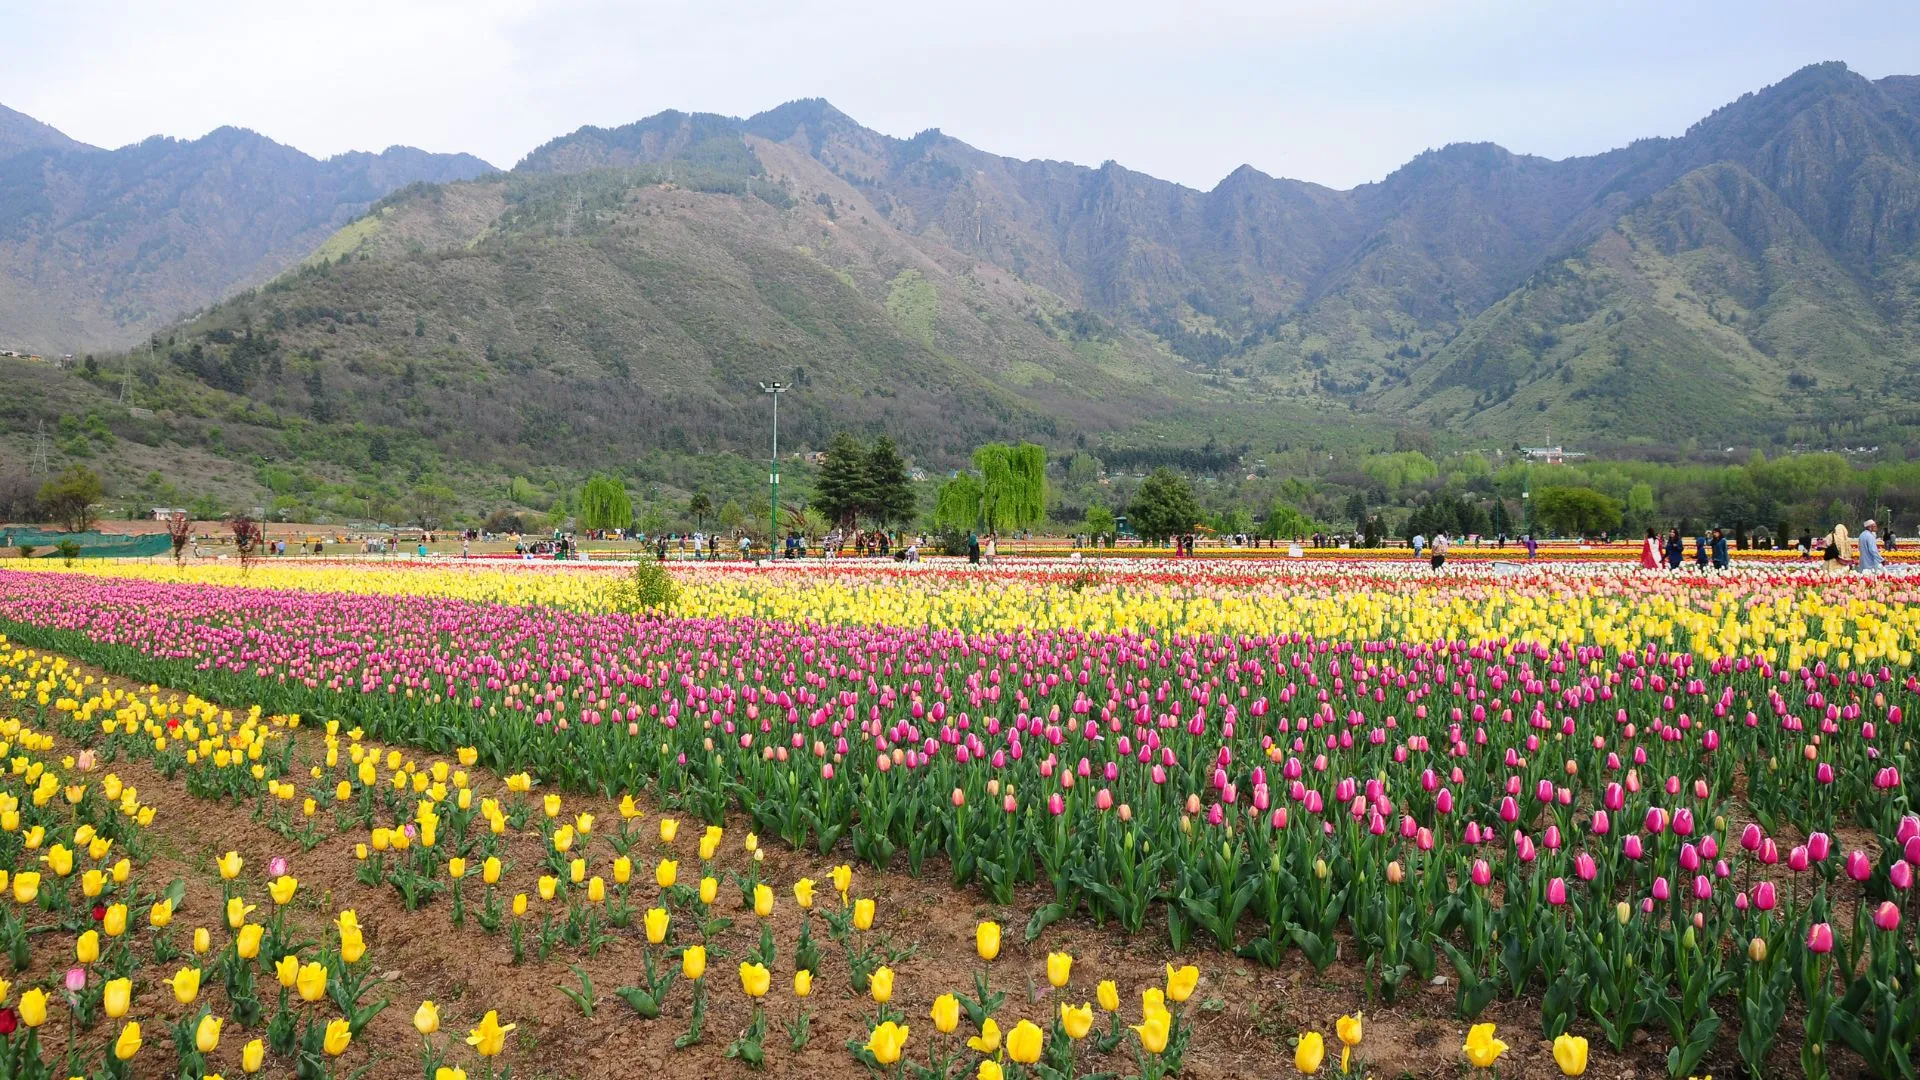 Field of tulips being overlooked by a mountain range